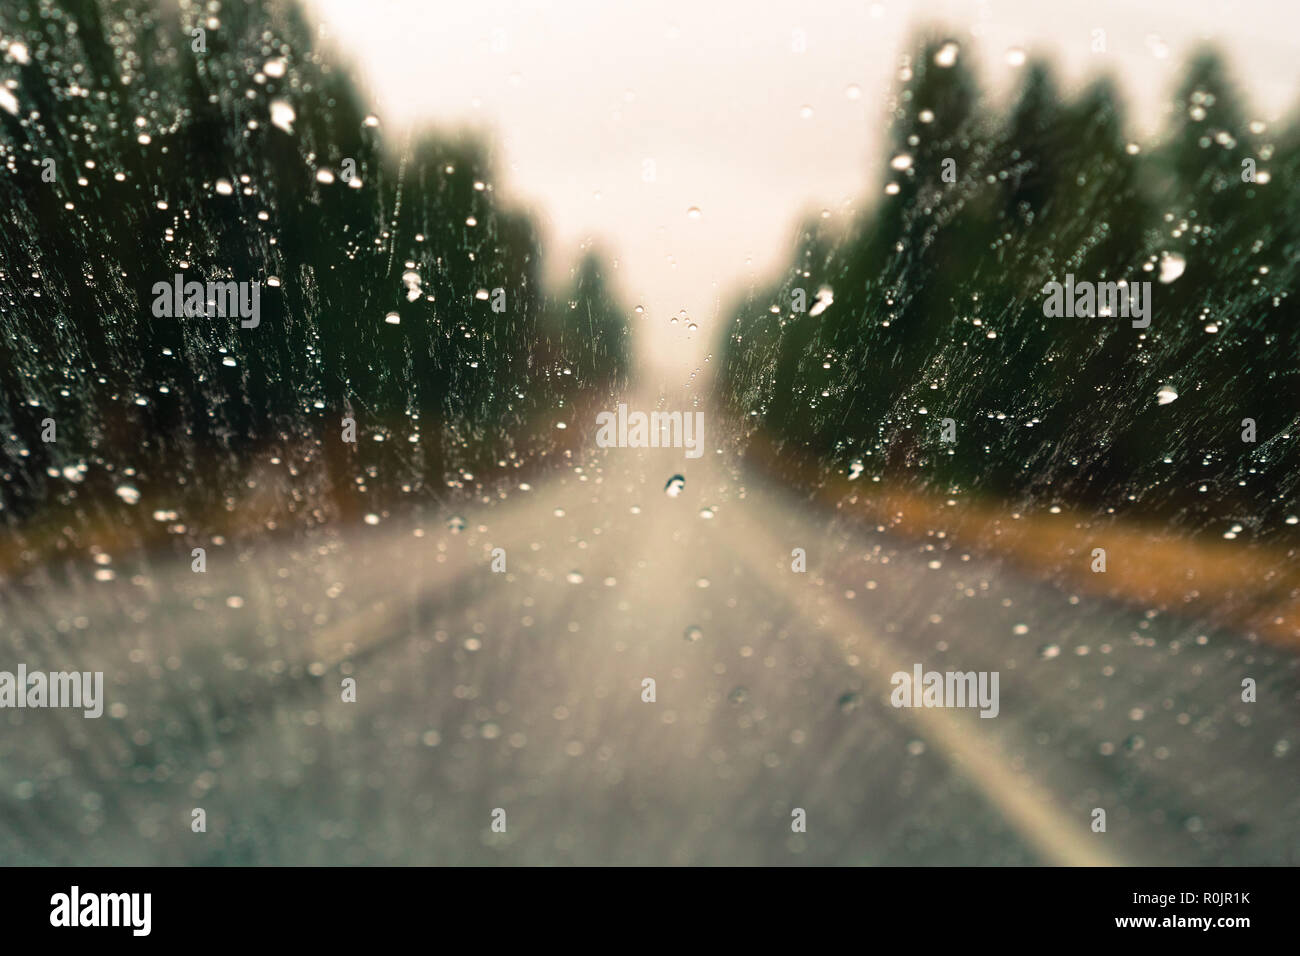 Drops of rain on the window; blurred highway and trees in the background; shallow depth of field Stock Photo